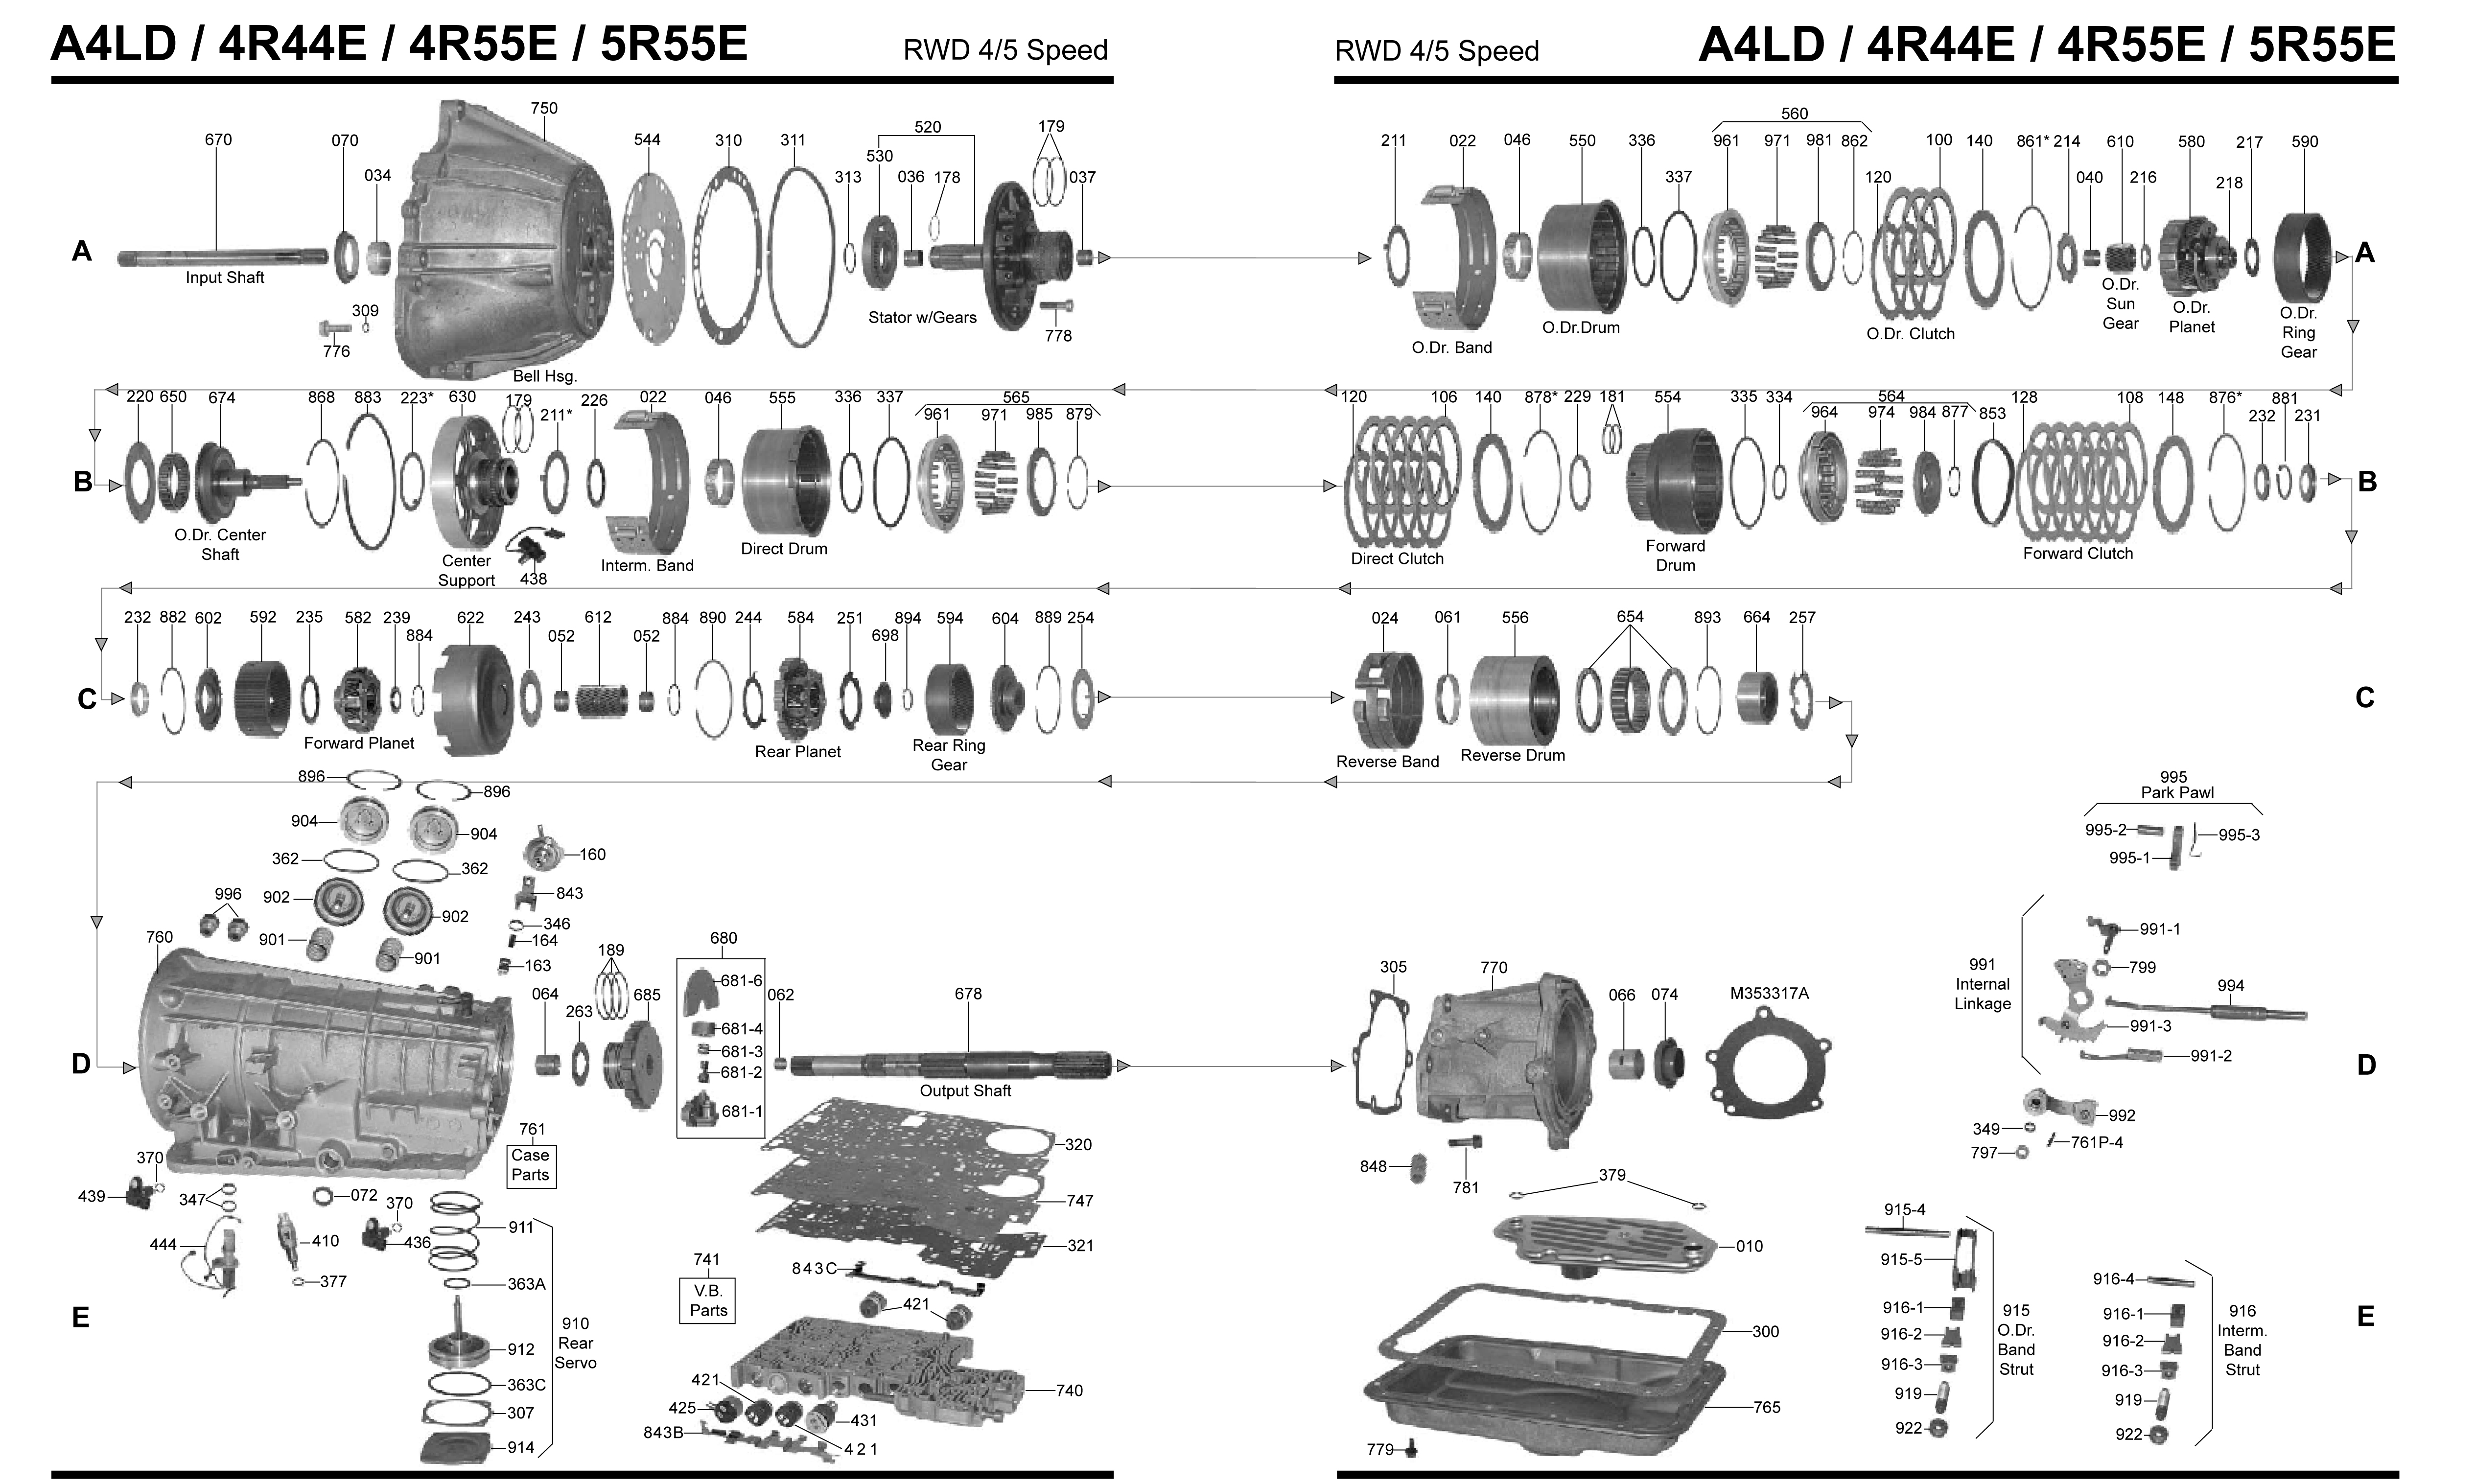 Ford 4eat transmission schematic